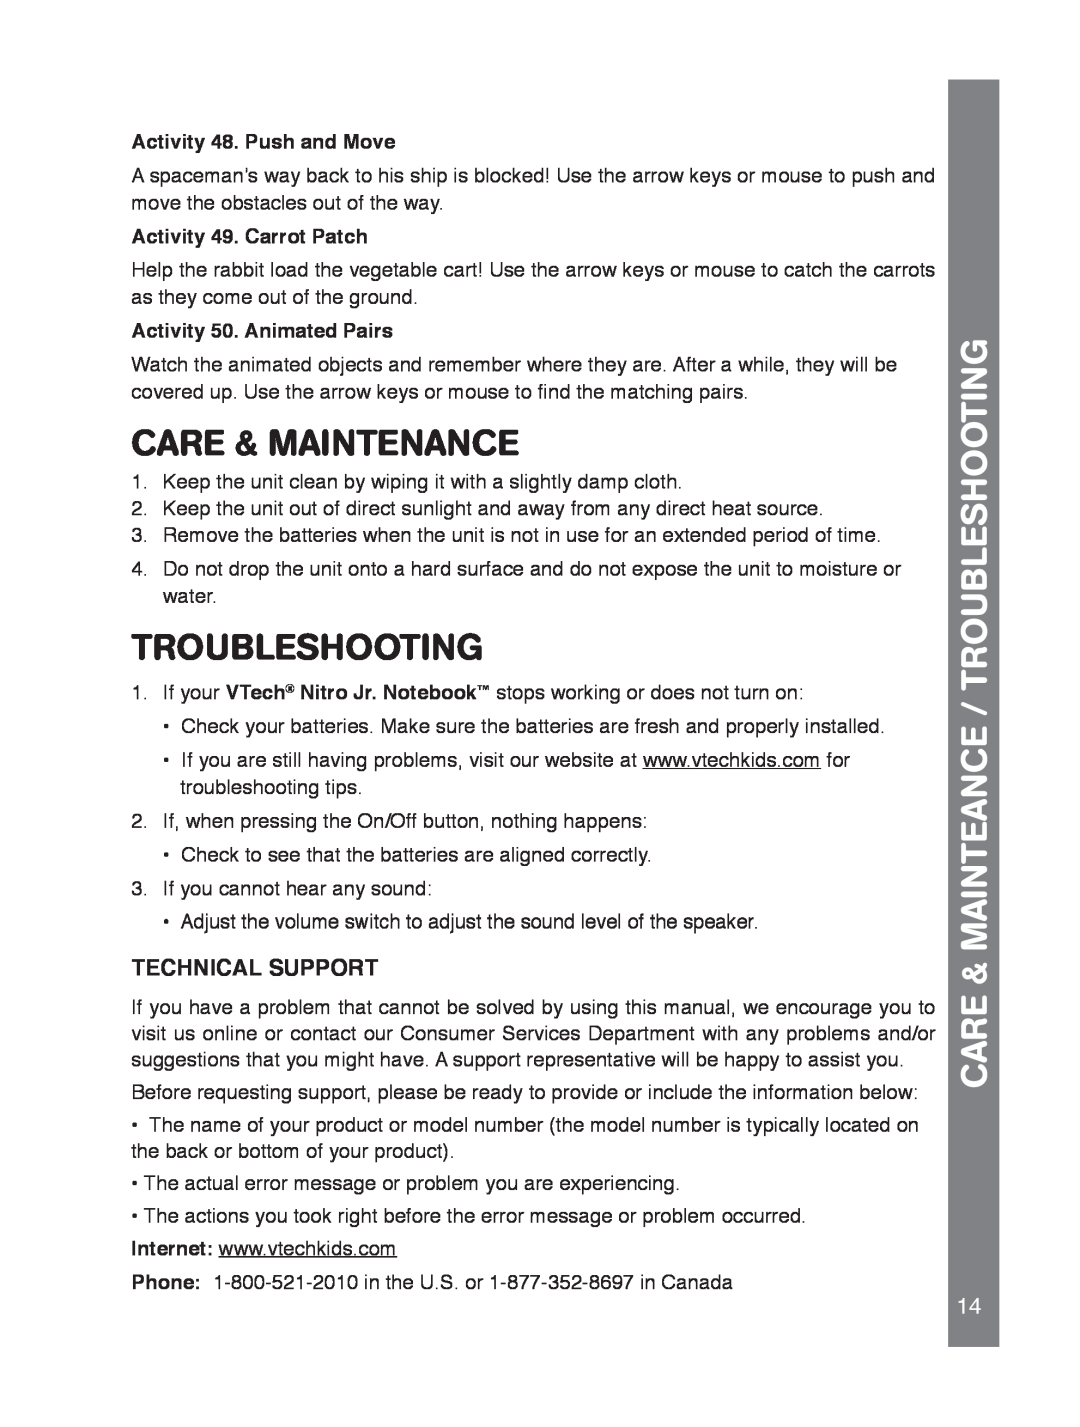 VTech 91-02239-001 manual Care & Maintenance, Care & Mainteance / Troubleshooting, Technical Support 